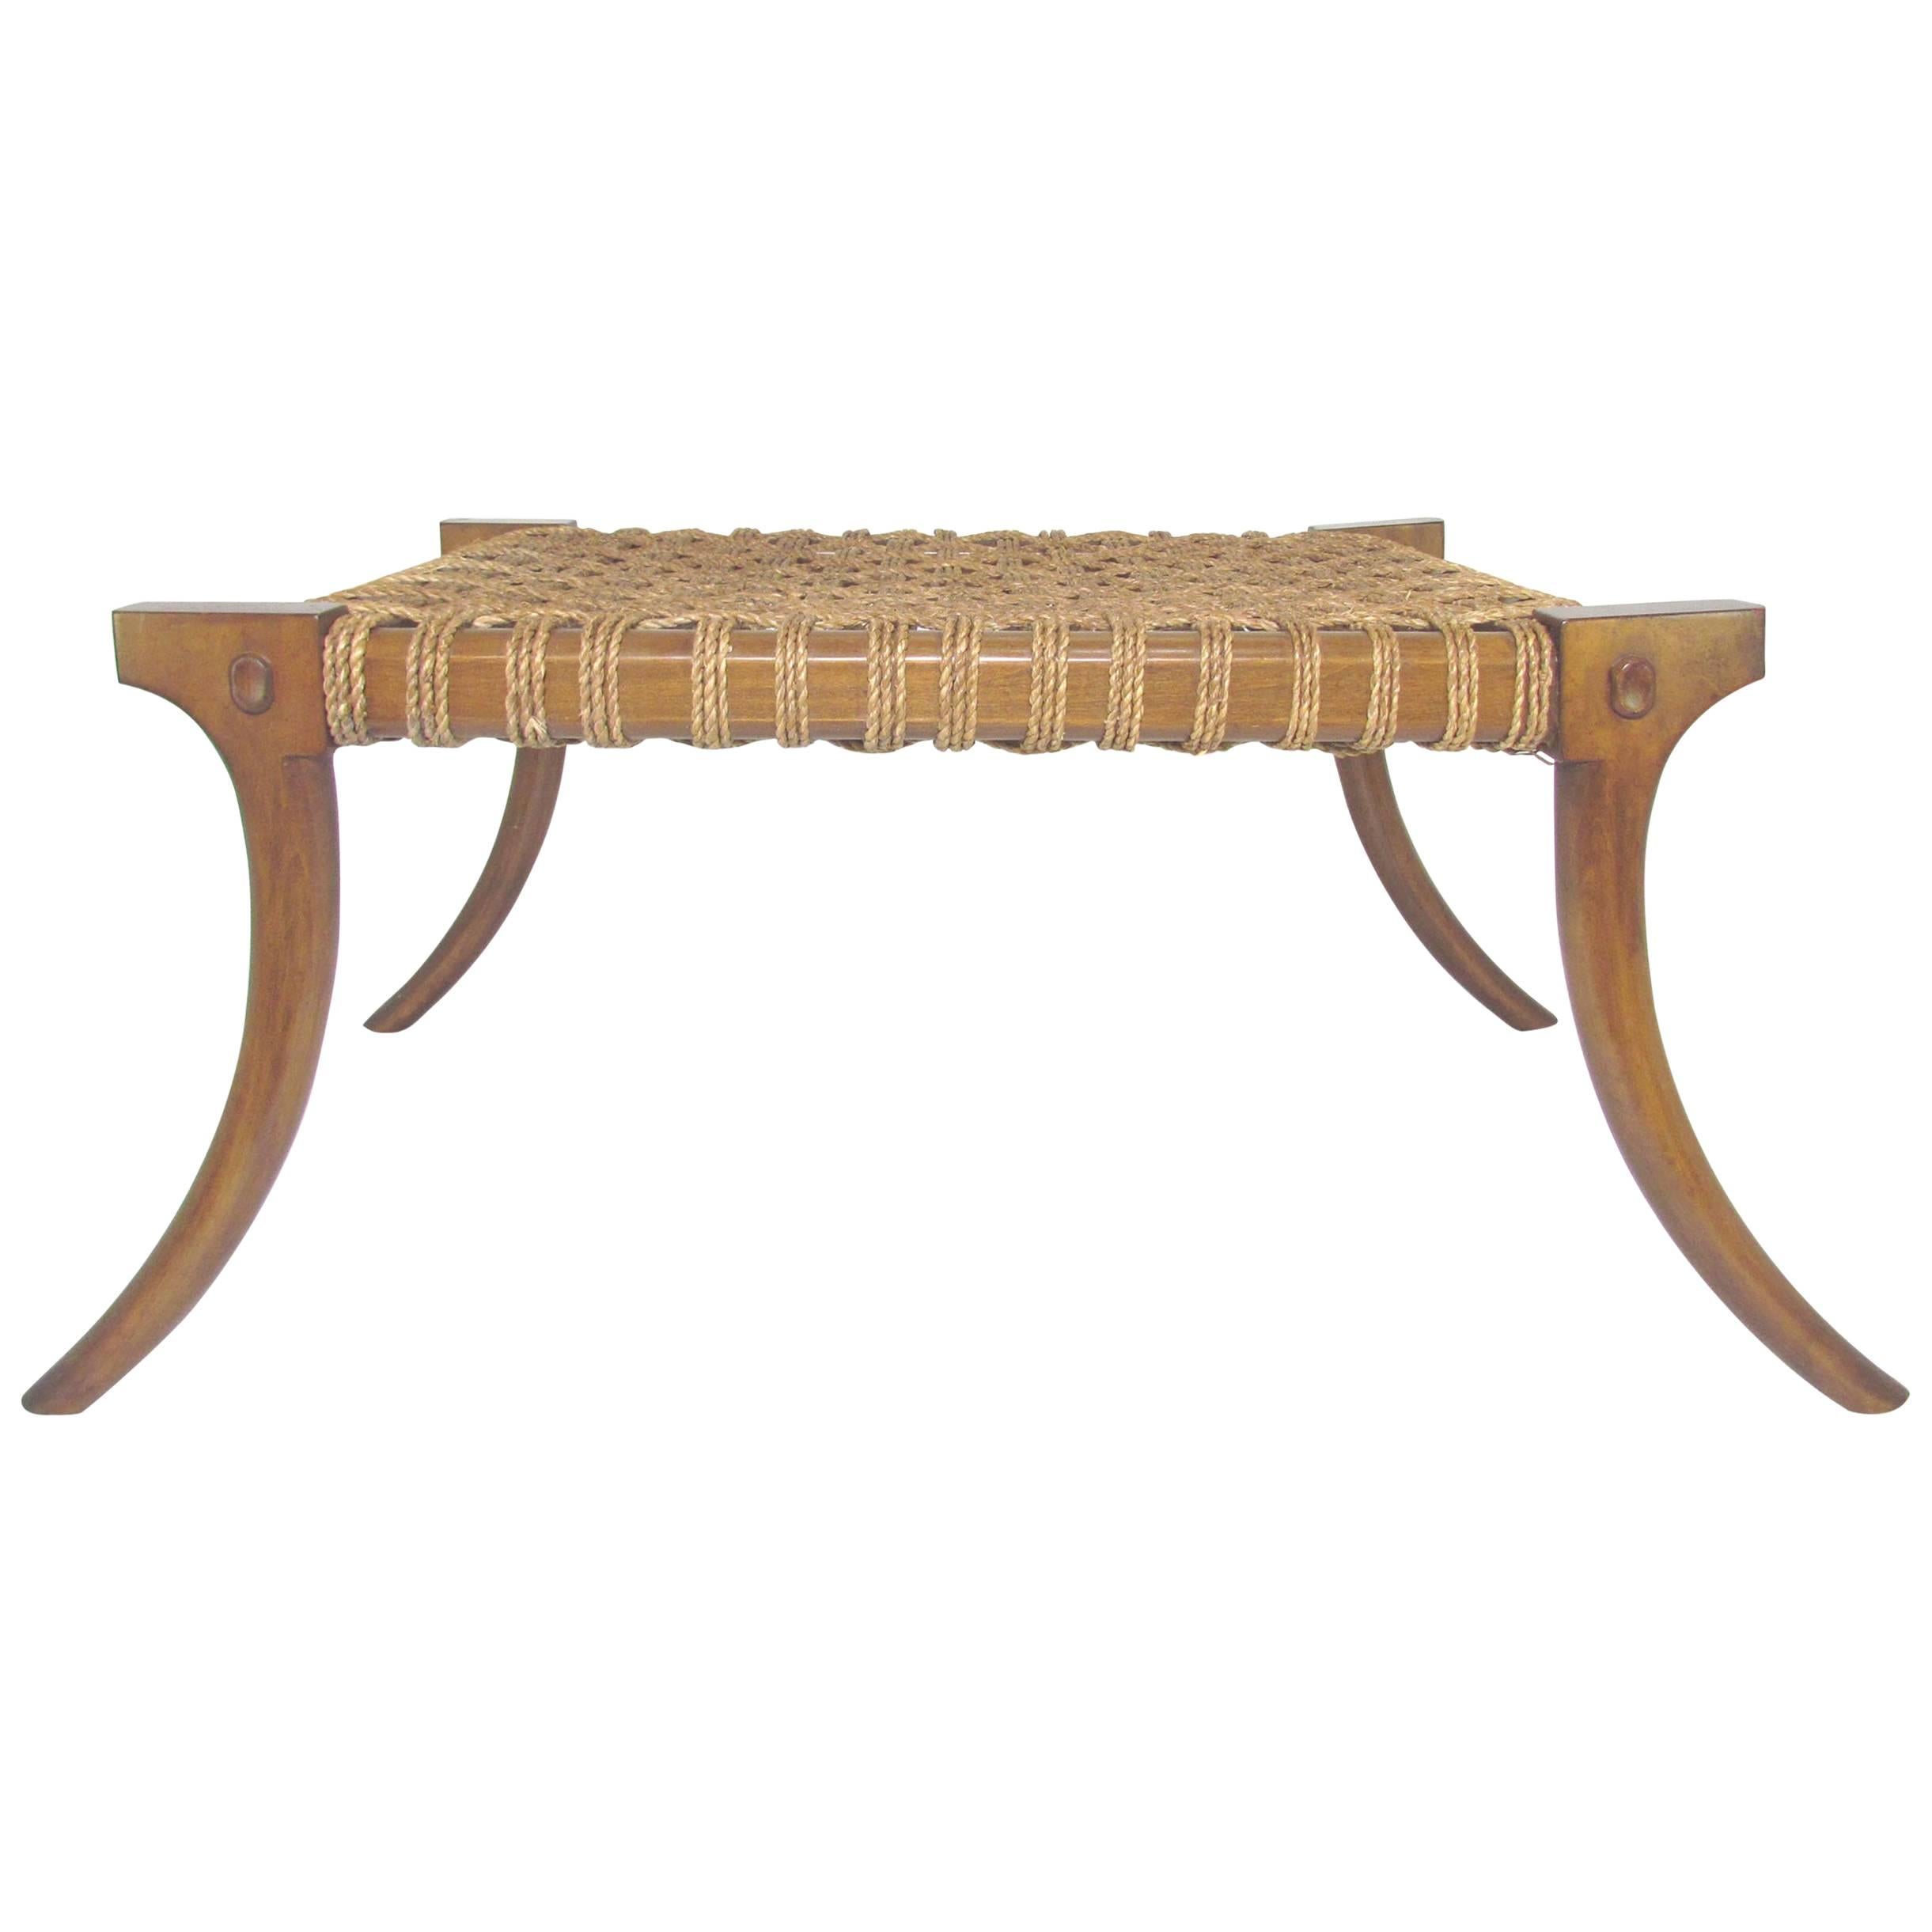 Klismos Bench or Coffee Table with Rope Seat, circa 1960s